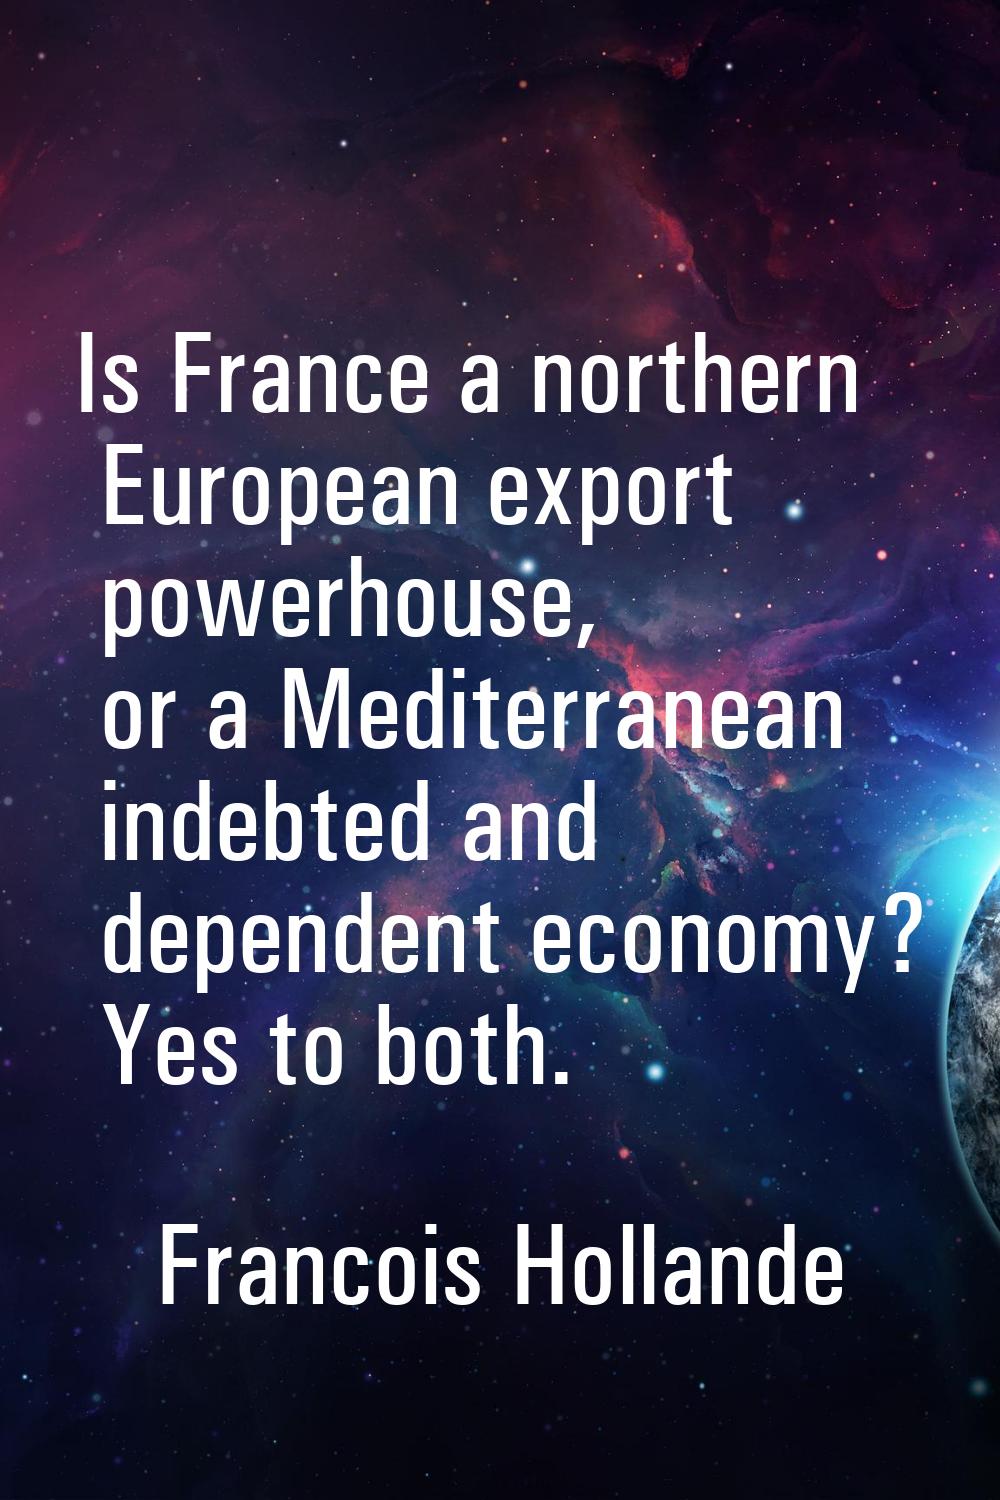 Is France a northern European export powerhouse, or a Mediterranean indebted and dependent economy?